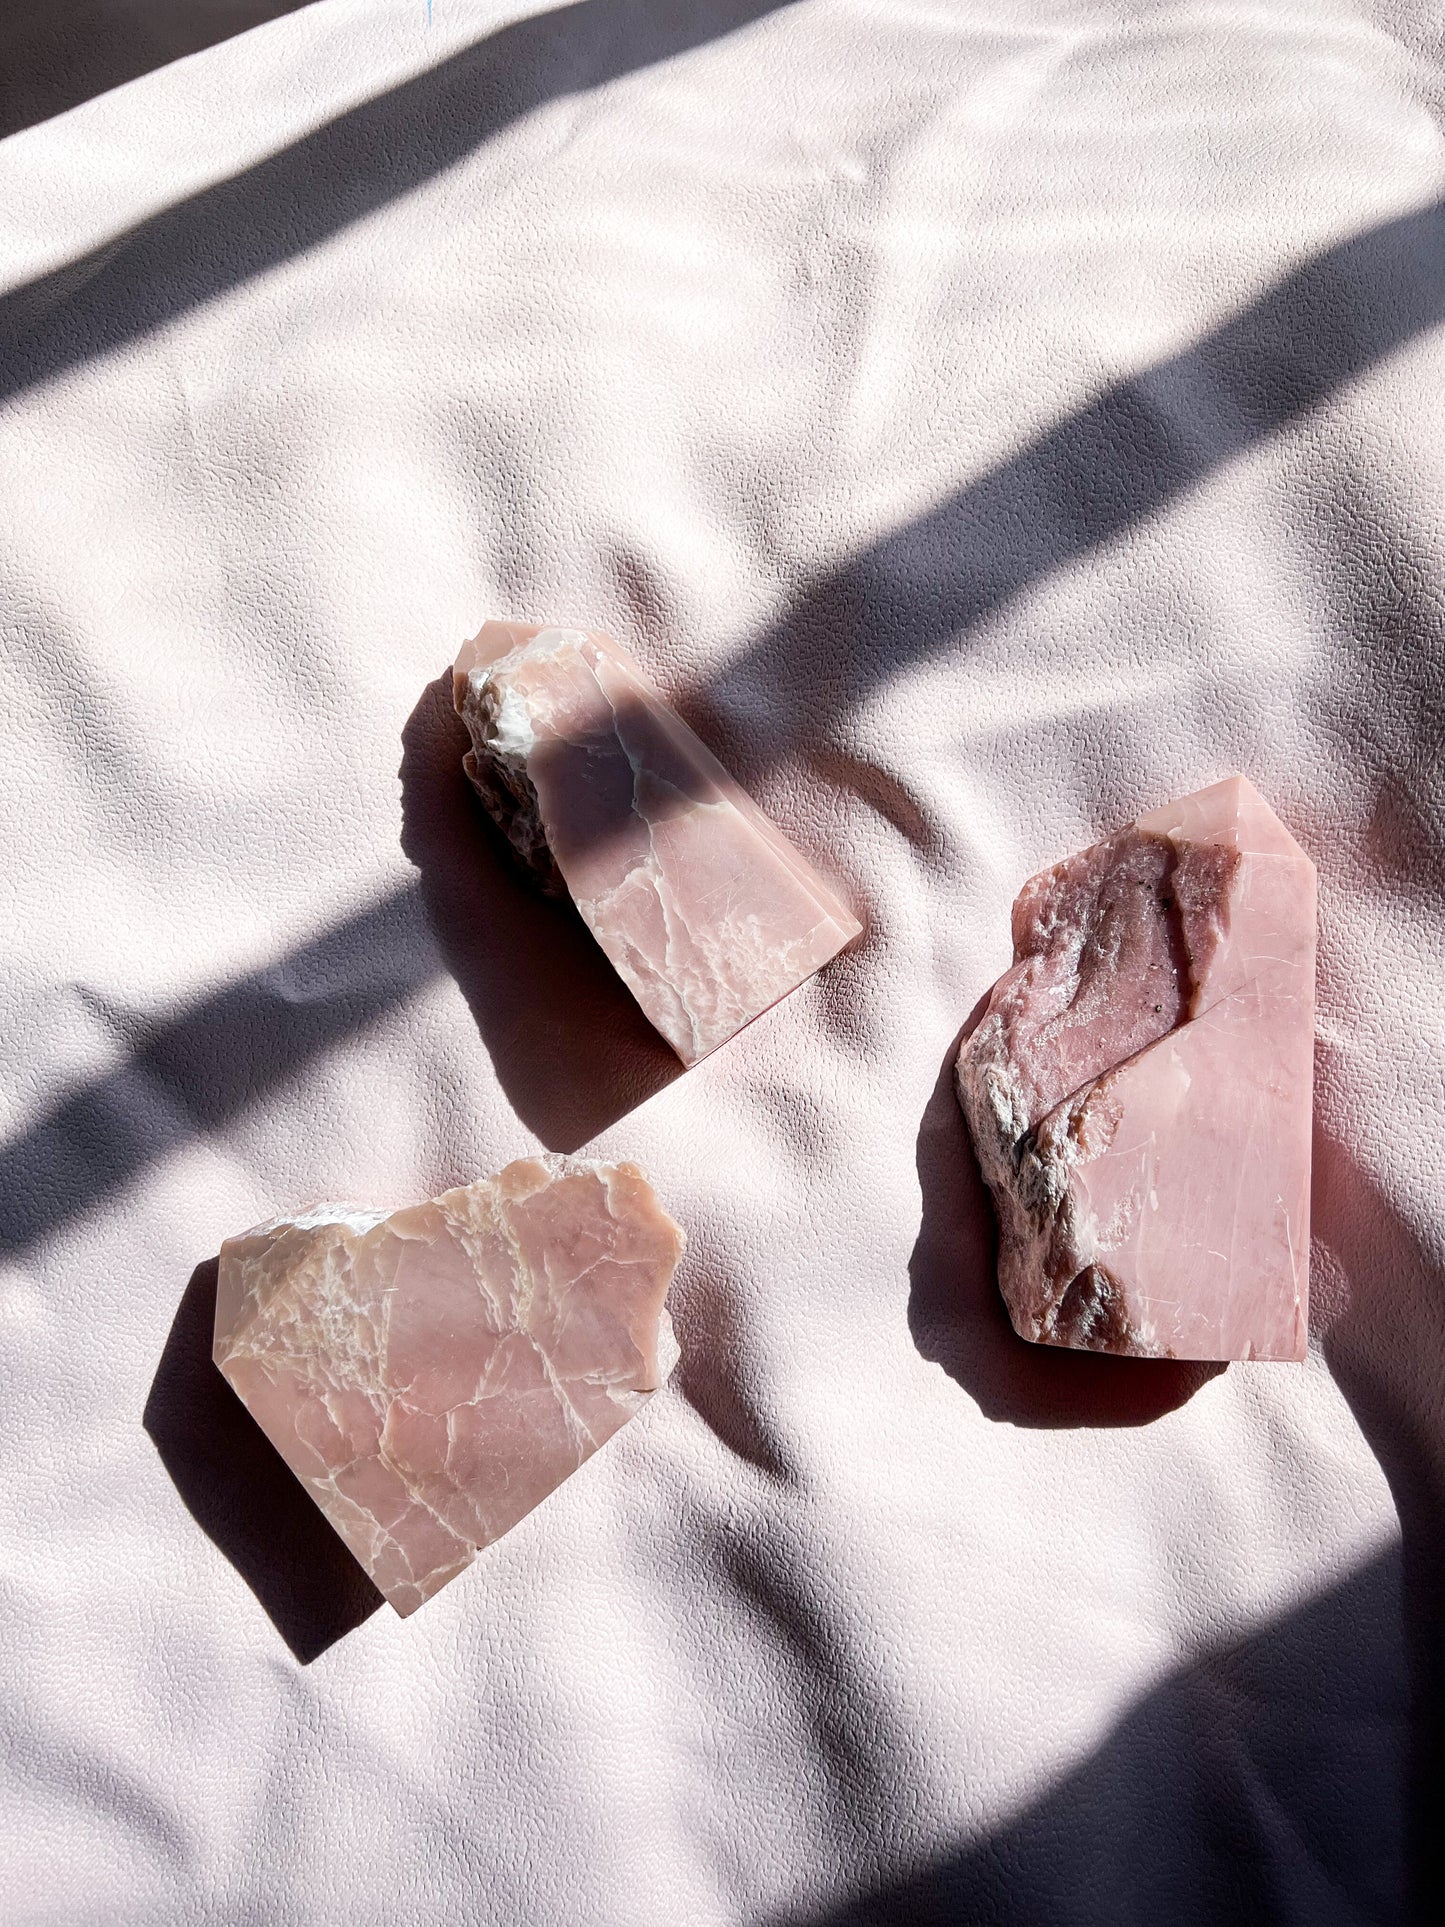 Pink Opal Towers